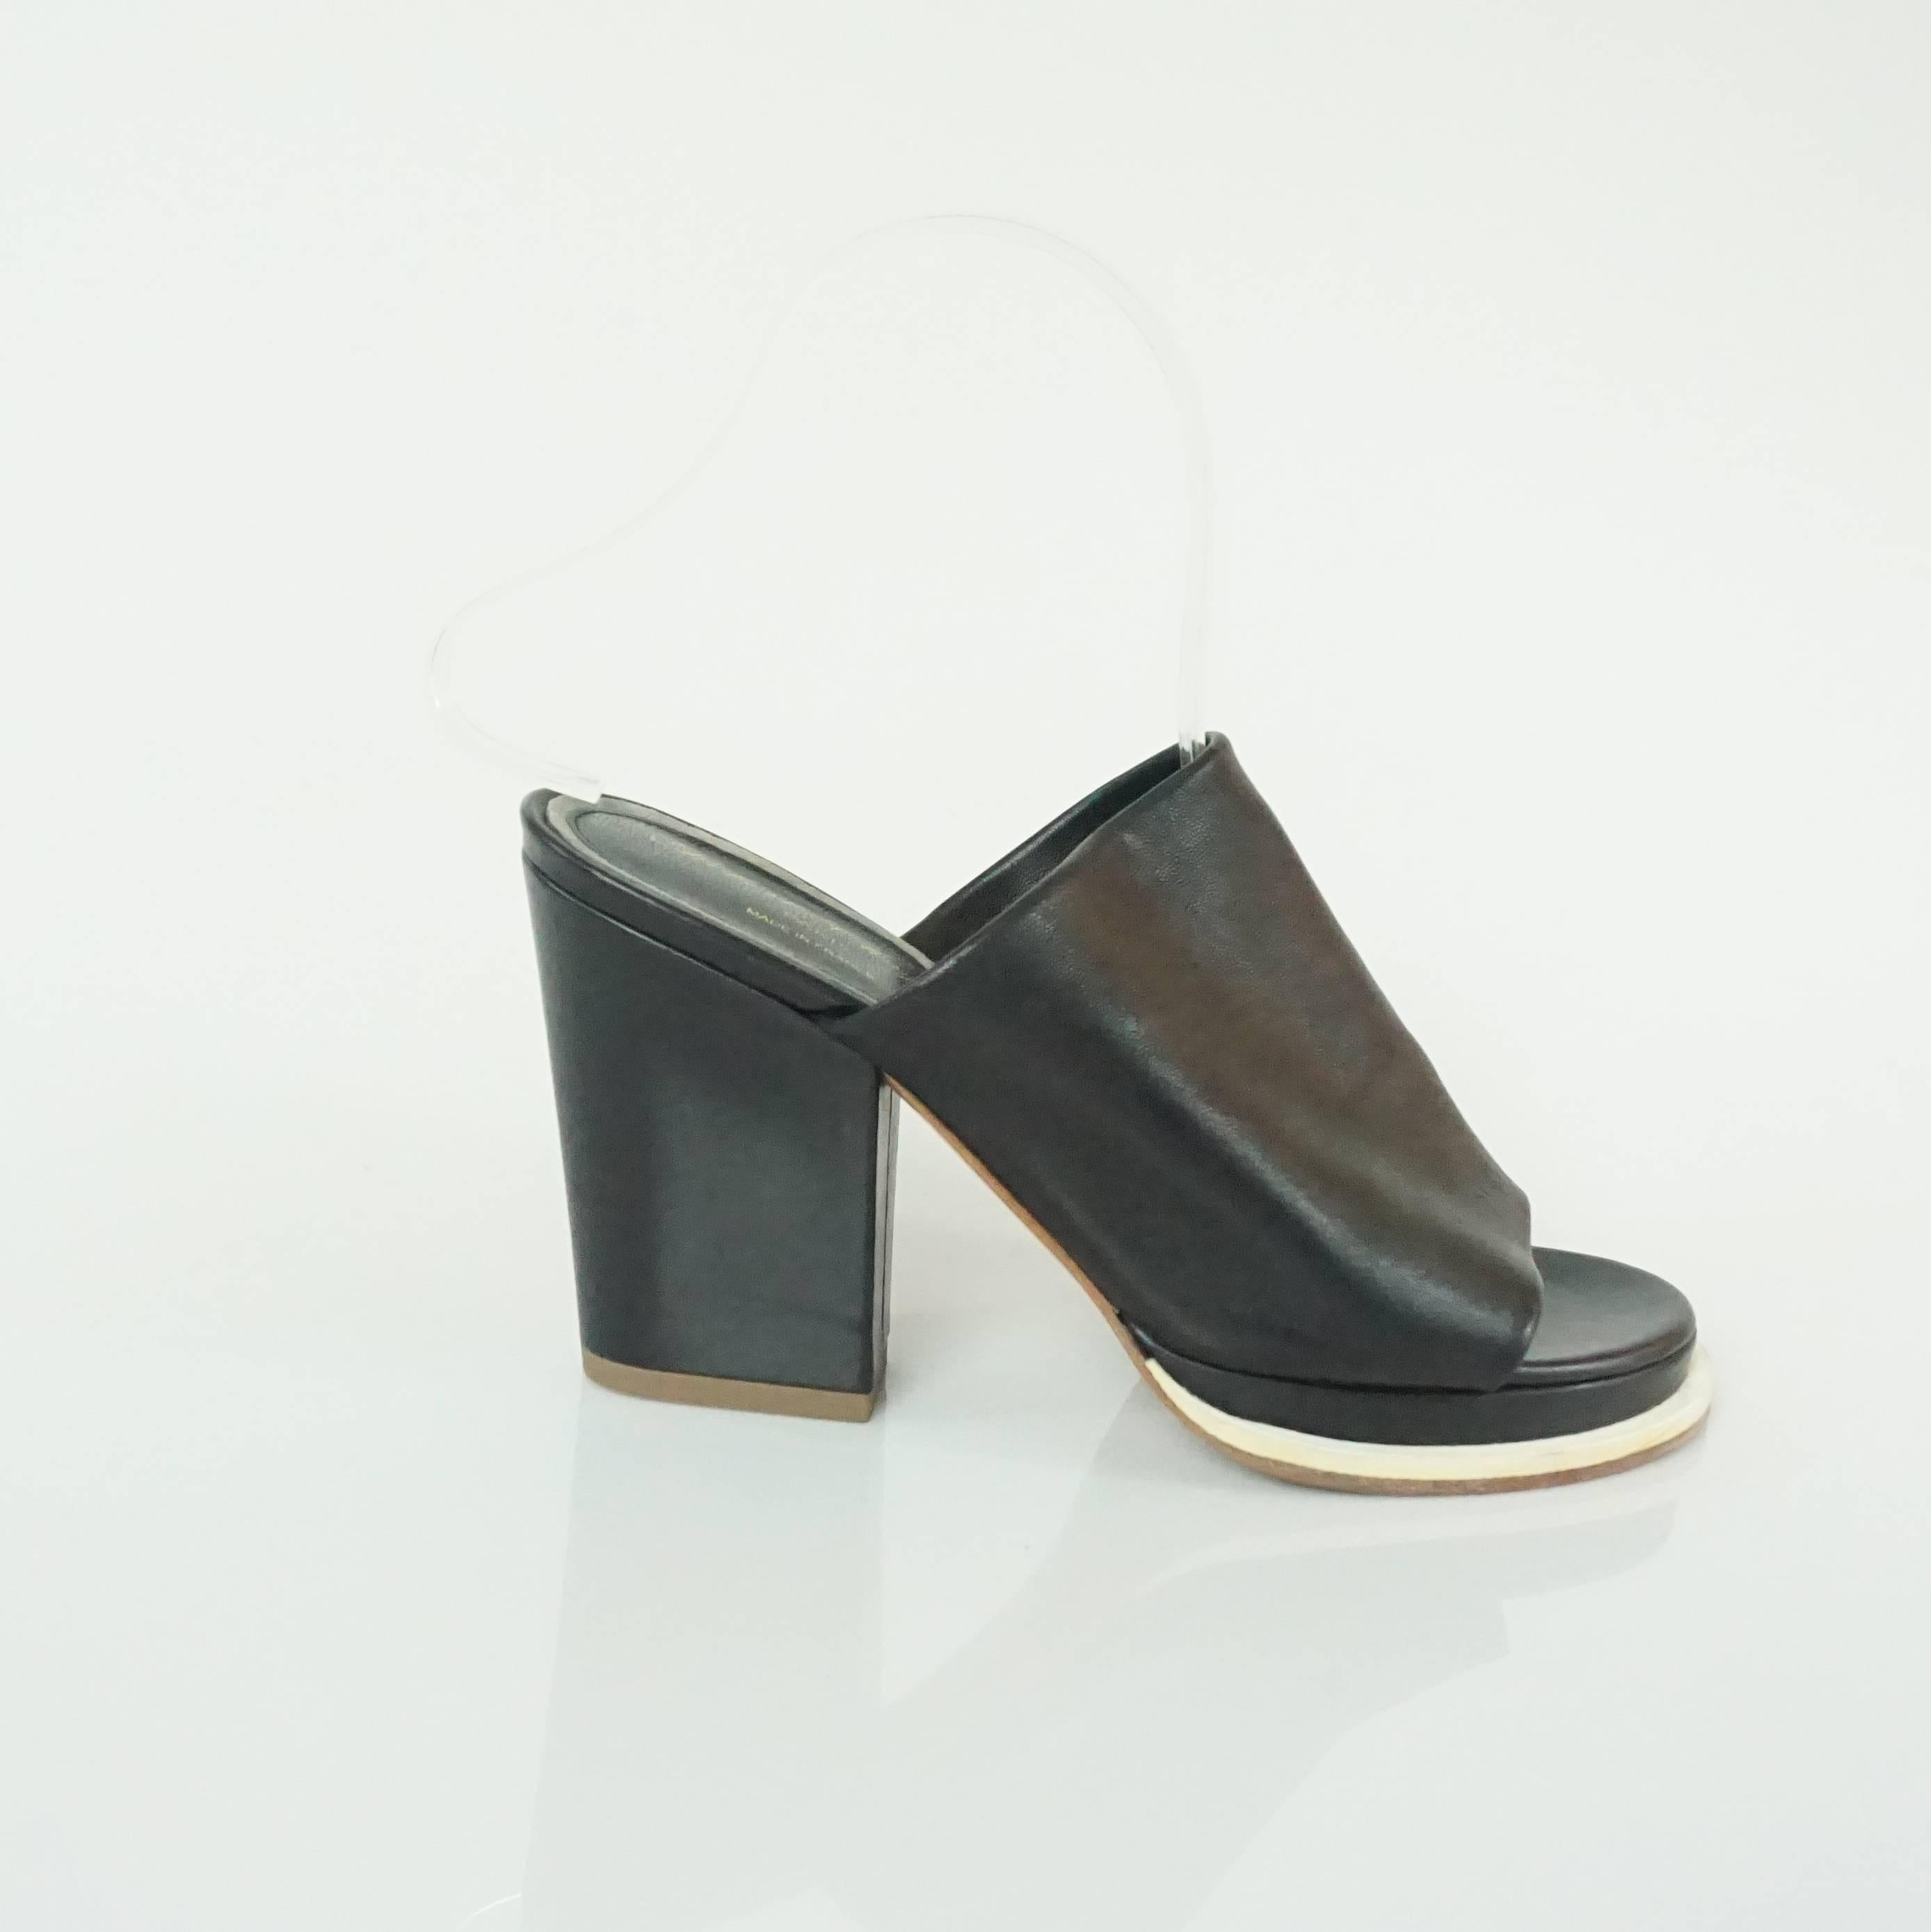 Robert Clergerie Black Leather Clogs with Block Heel - 37. The shoes are trendy and in excellent condition with light wear. 

